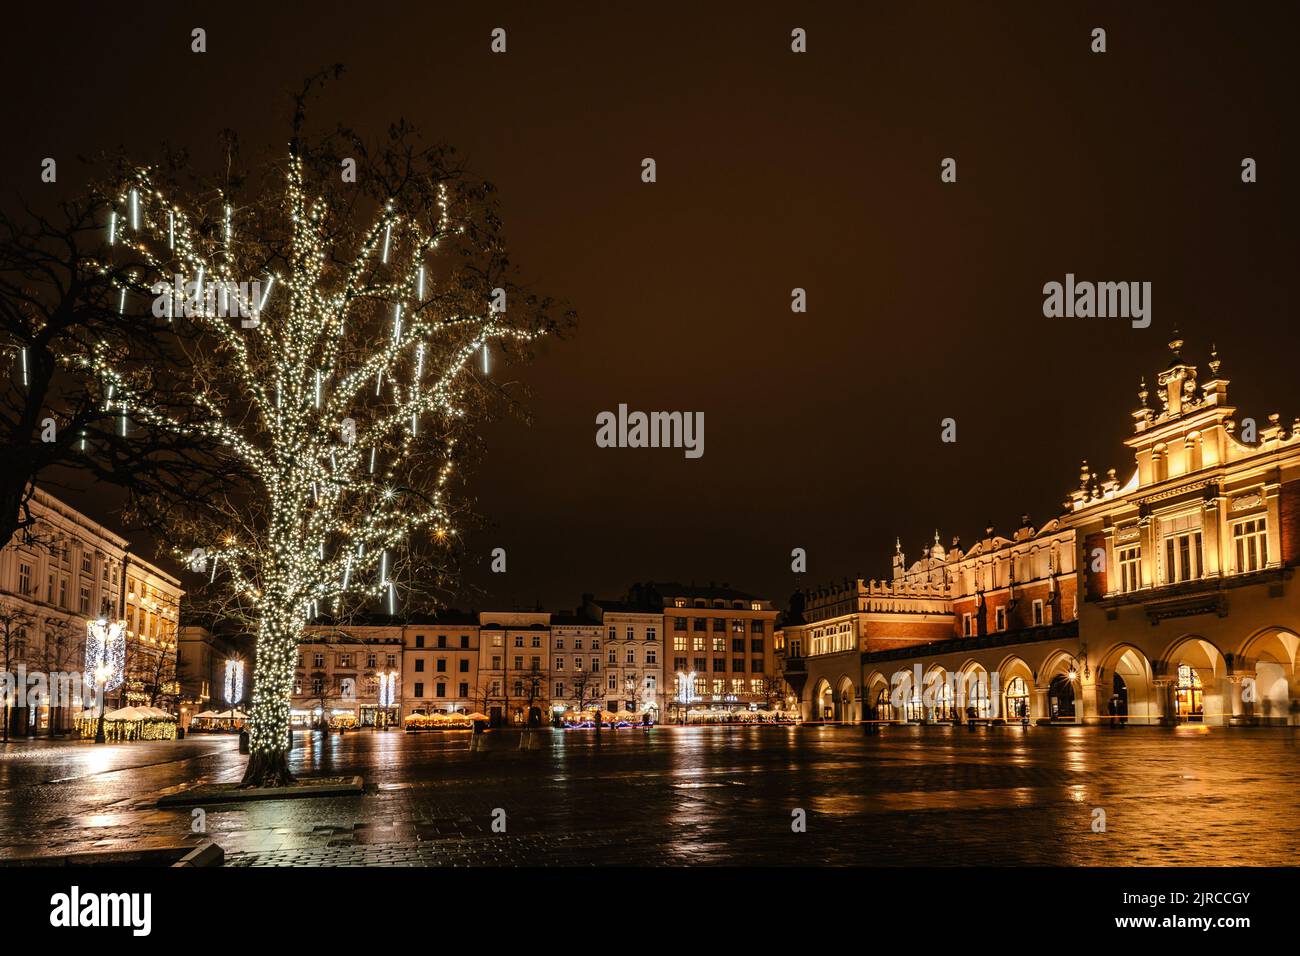 Krakow after rain,Poland.Main square with famous Christmas markets,Rynek Glowny at night with reflection,decorated Xmas tree.Festive atmosphere,blurre Stock Photo